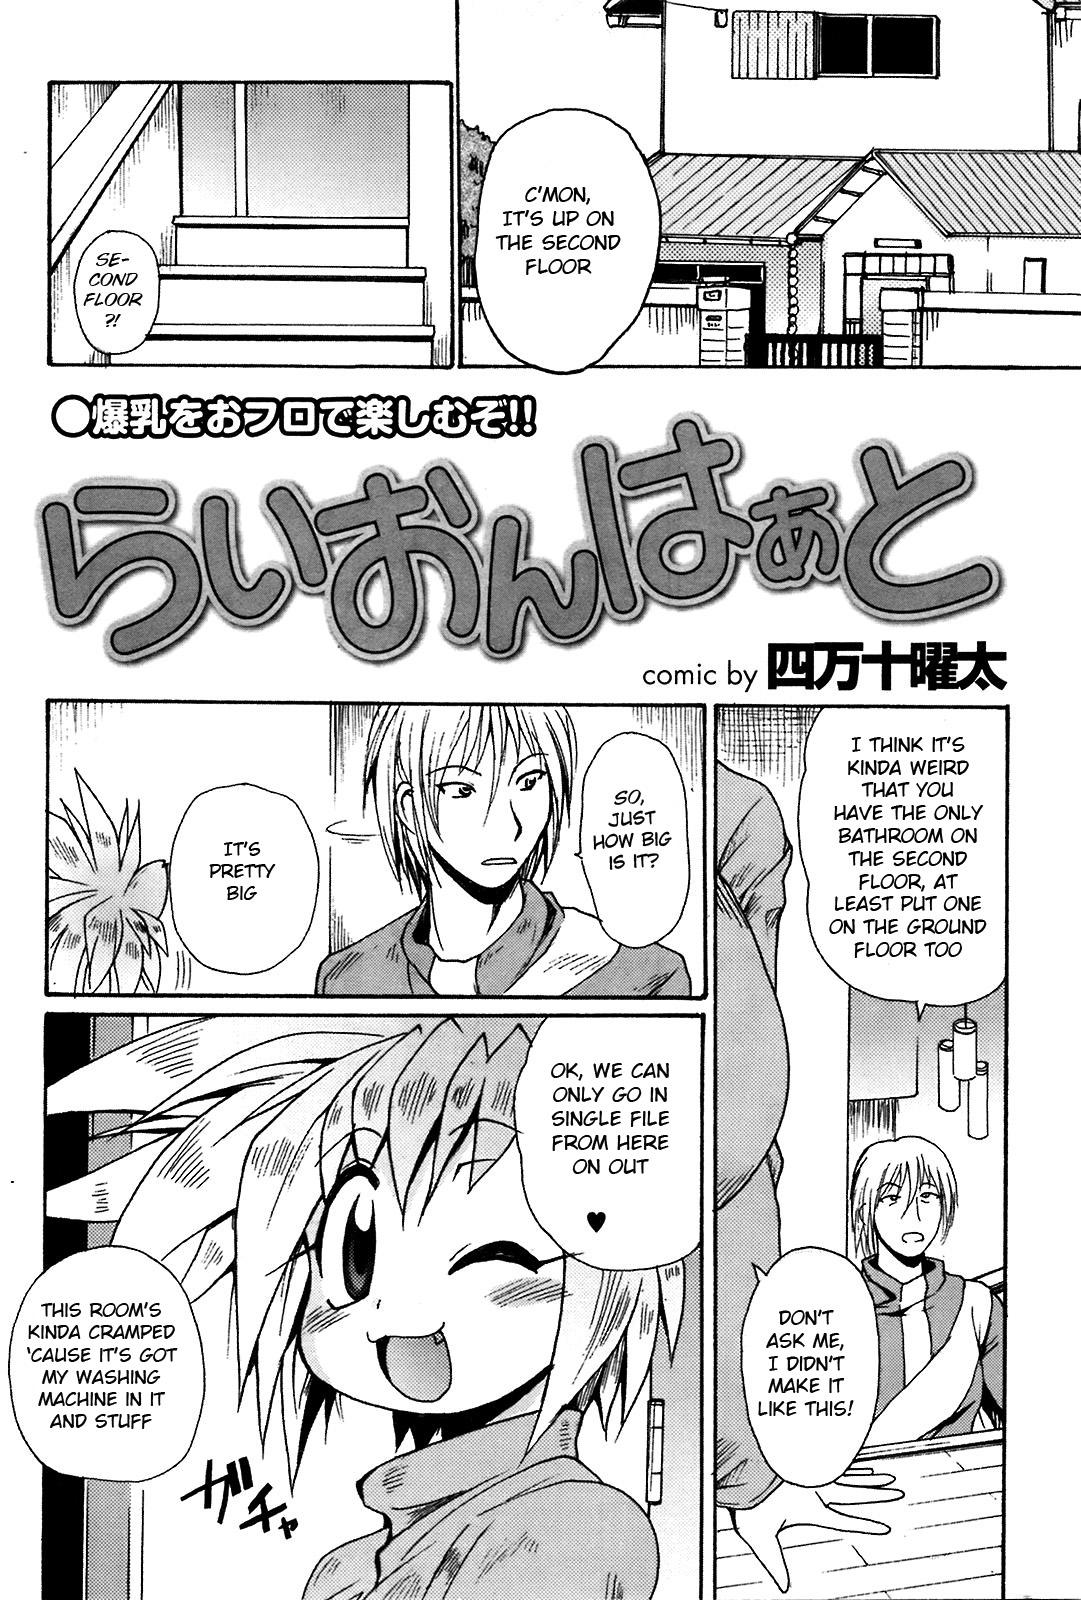 Ruiva Lion Heart With - Page 2